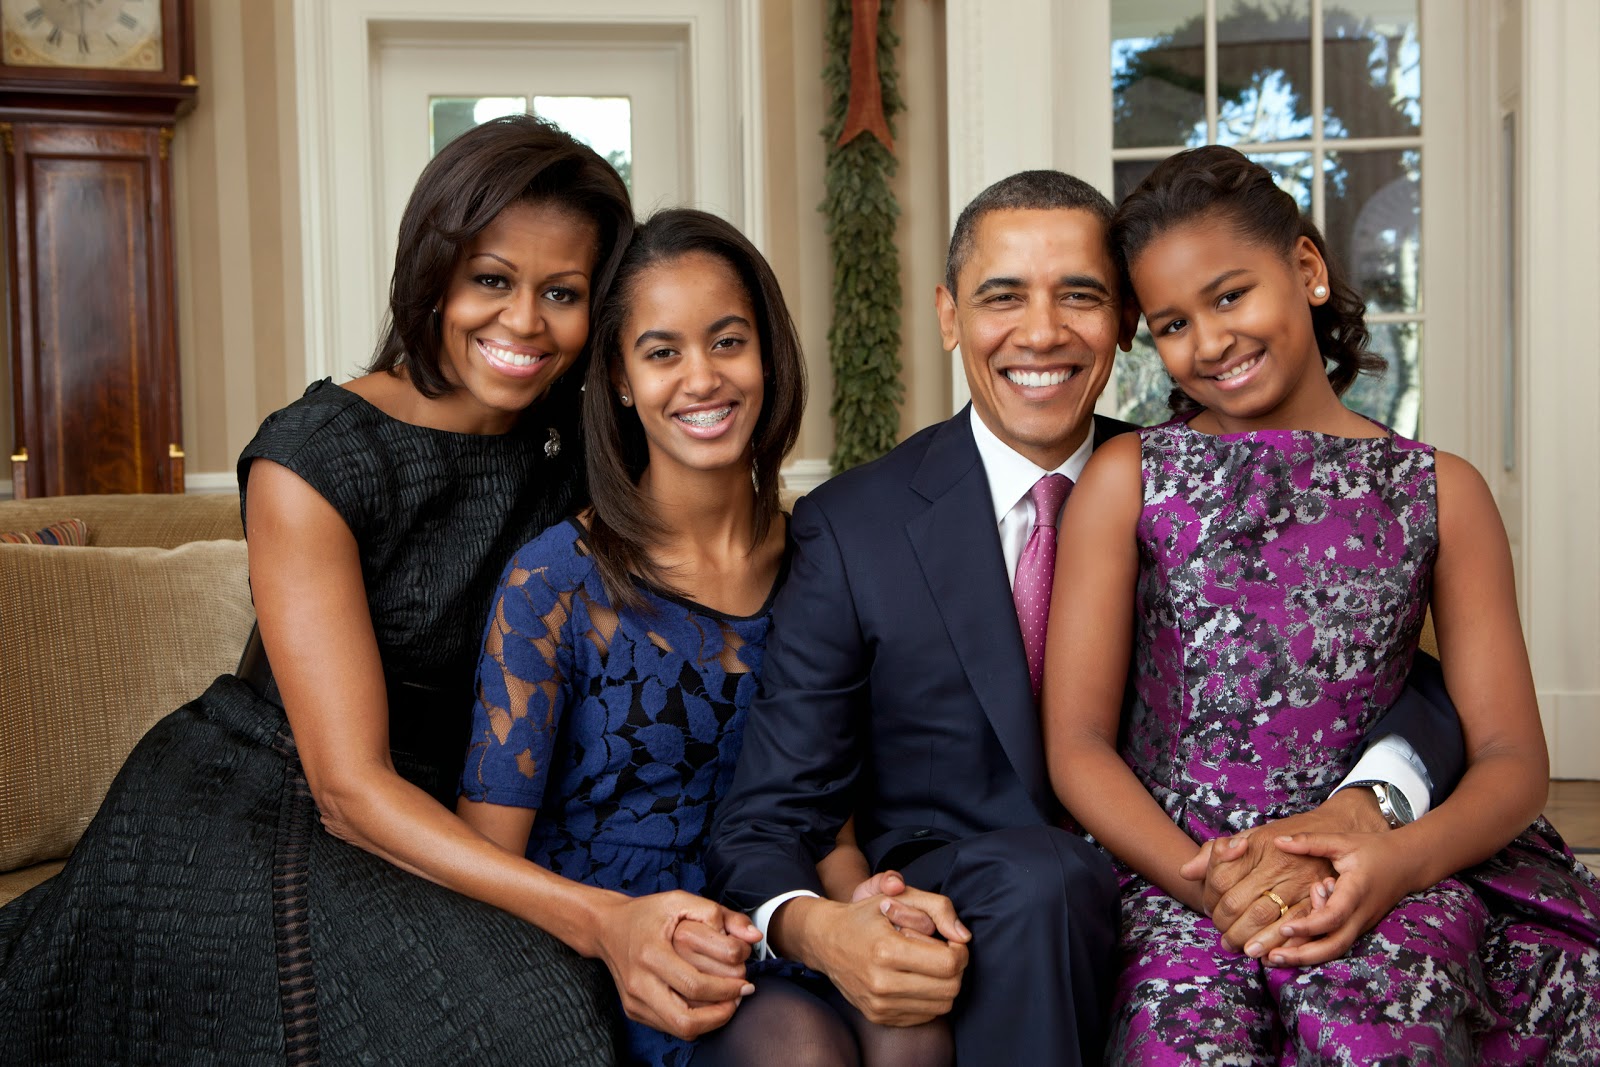 Meanderful: Obama's children are being spied on by the NSA1600 x 1067